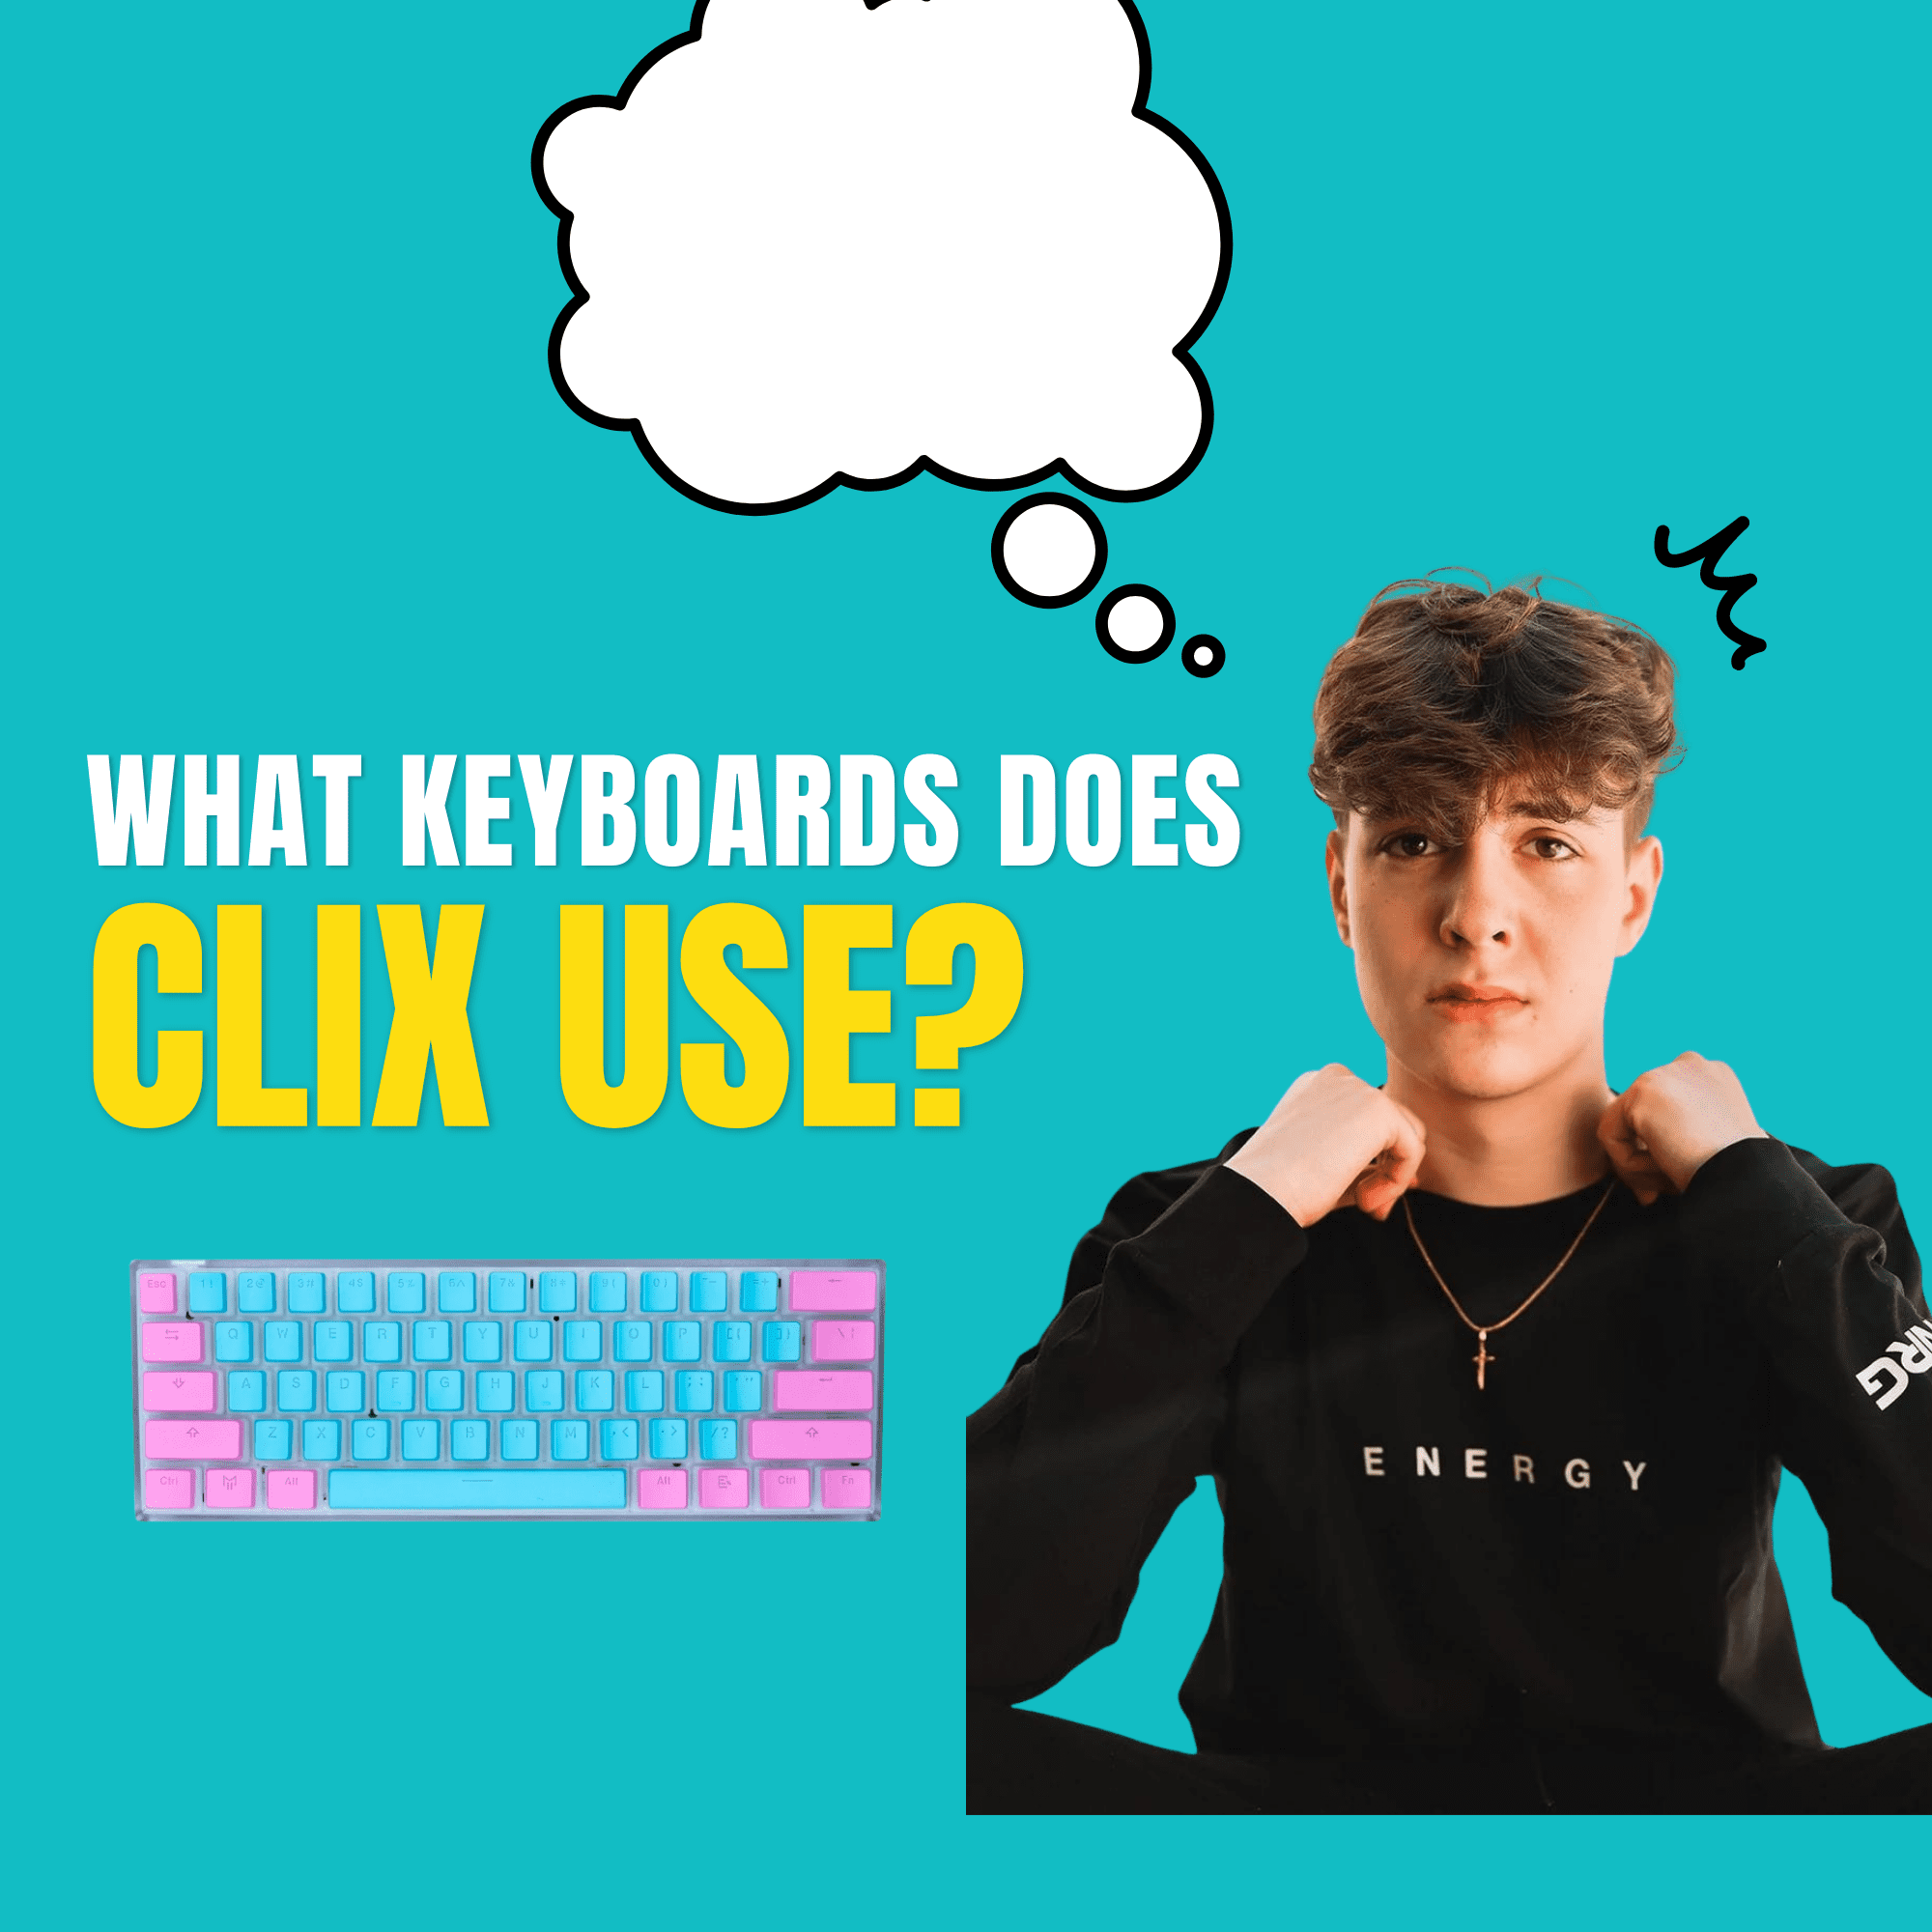 what keyboards doex clix use while gaming?